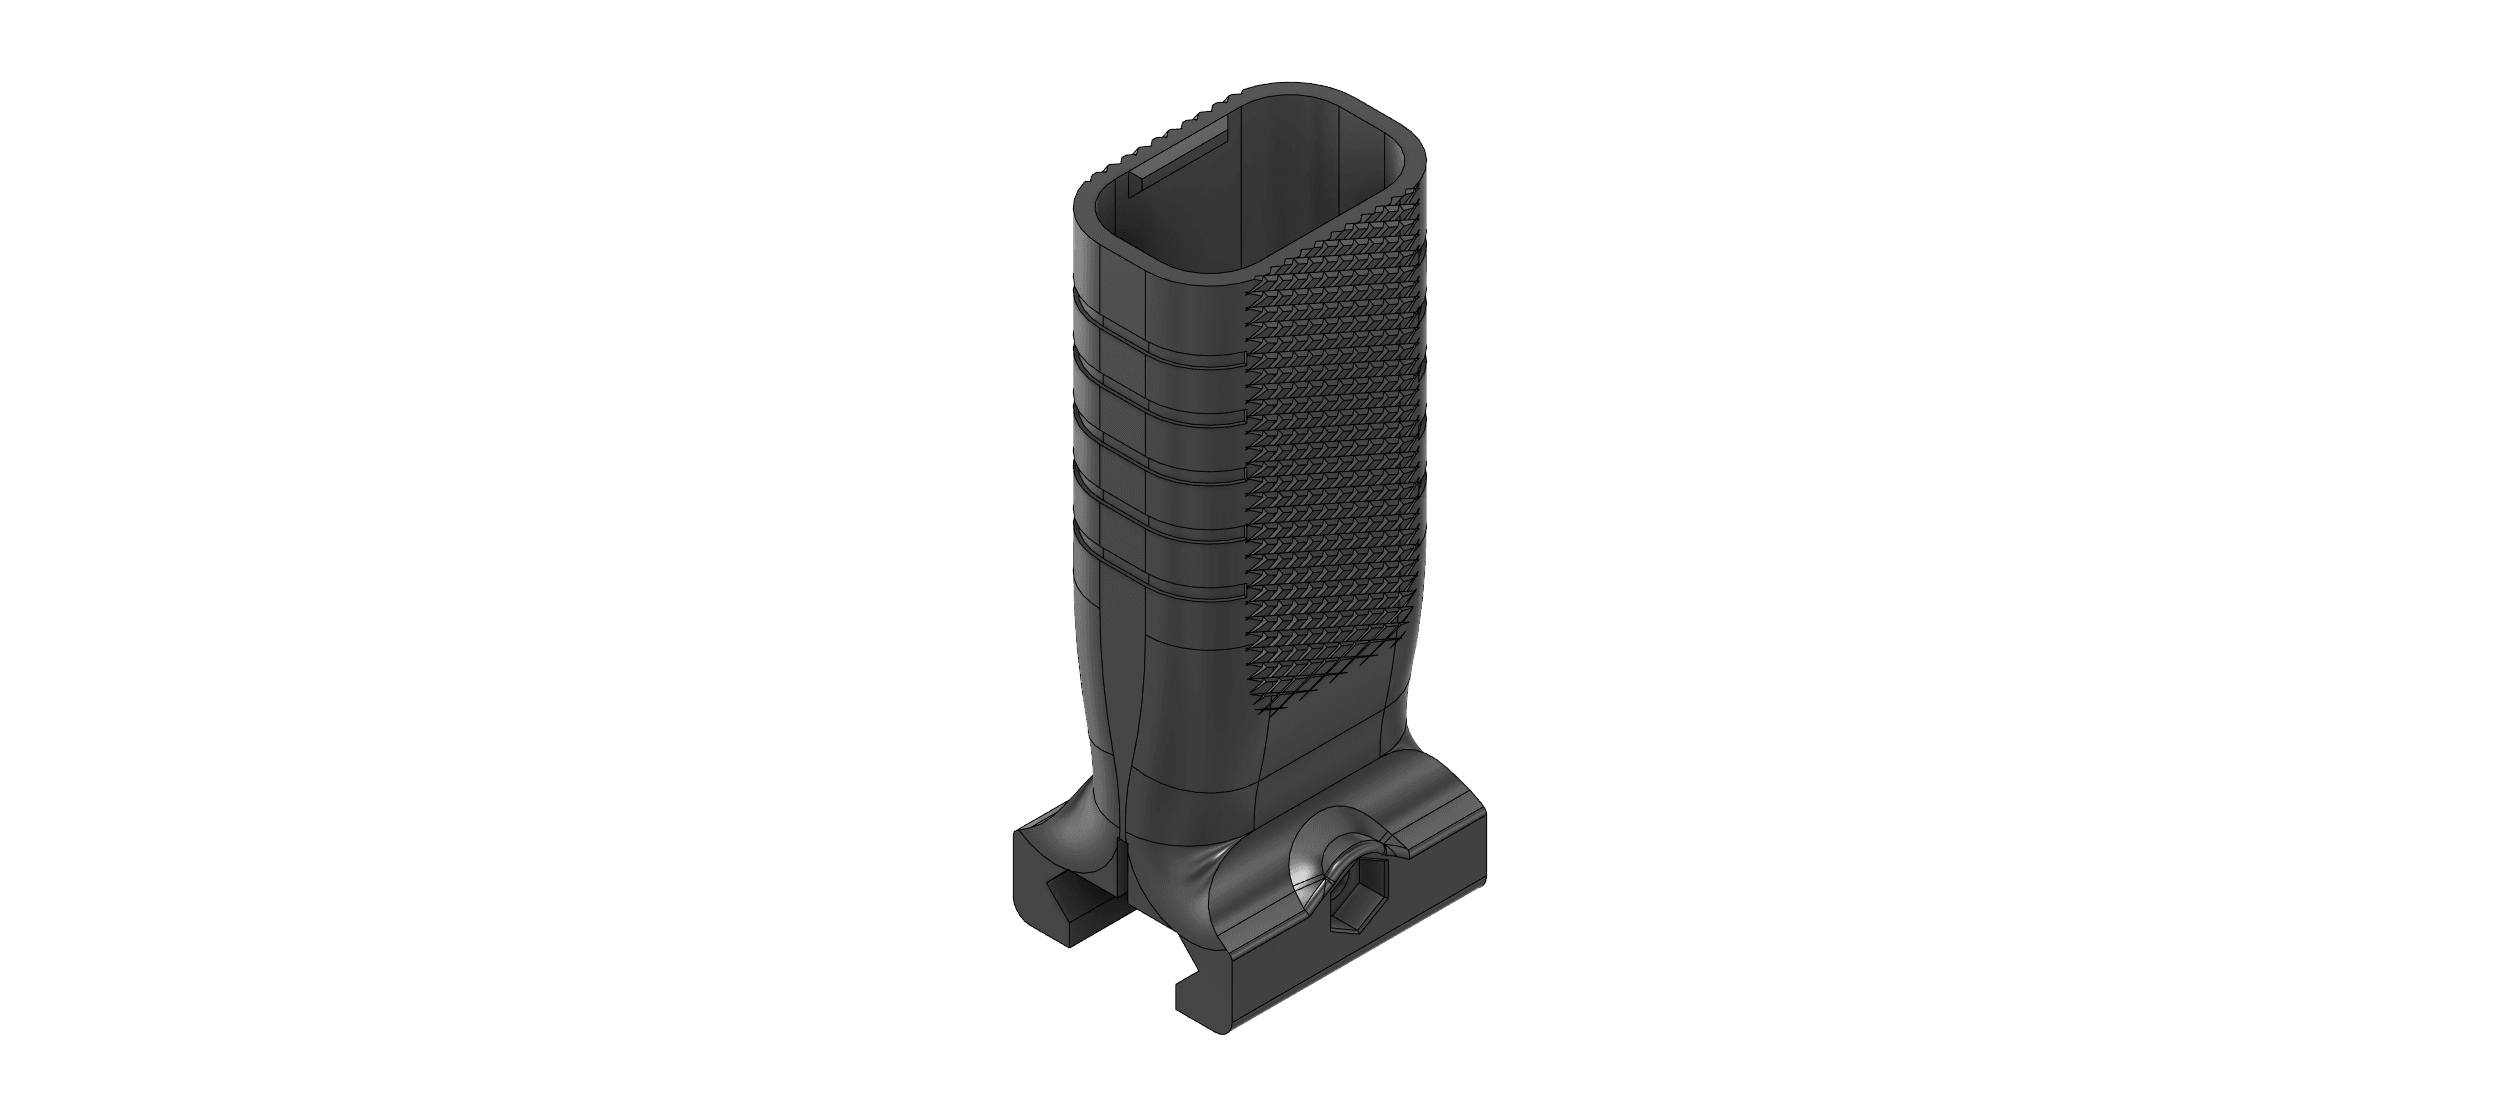 VERTICAL FRONT GRIP WITH STORAGE SPACE FOR PICATINNY RAILS 3d model